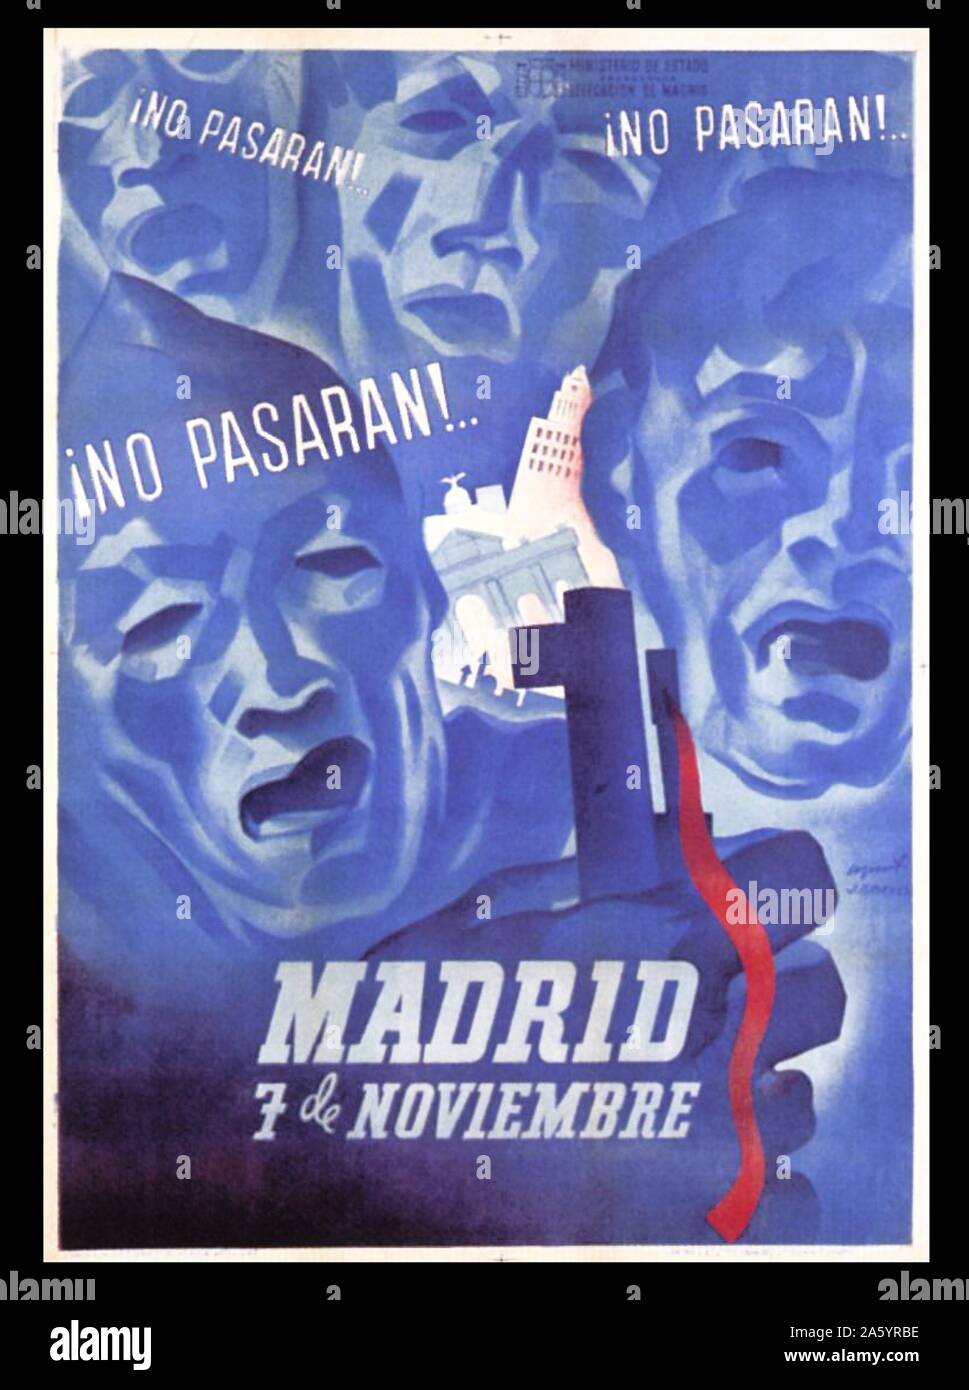 7 Nov. 1937. Issued by the Ministry of Propaganda, Madrid Office. Issued to honour the people's defence of Madrid; its dominant blue colour may evoke the blue overalls that were standard worker's attire. On Nov 7th General Franco, head of the military rebellion announced that the city would fall the next day; instead the Madrid resisted his armies for two years. The poster shows evidence of the expressionist influence on the Spanish Civil War art. Stock Photo